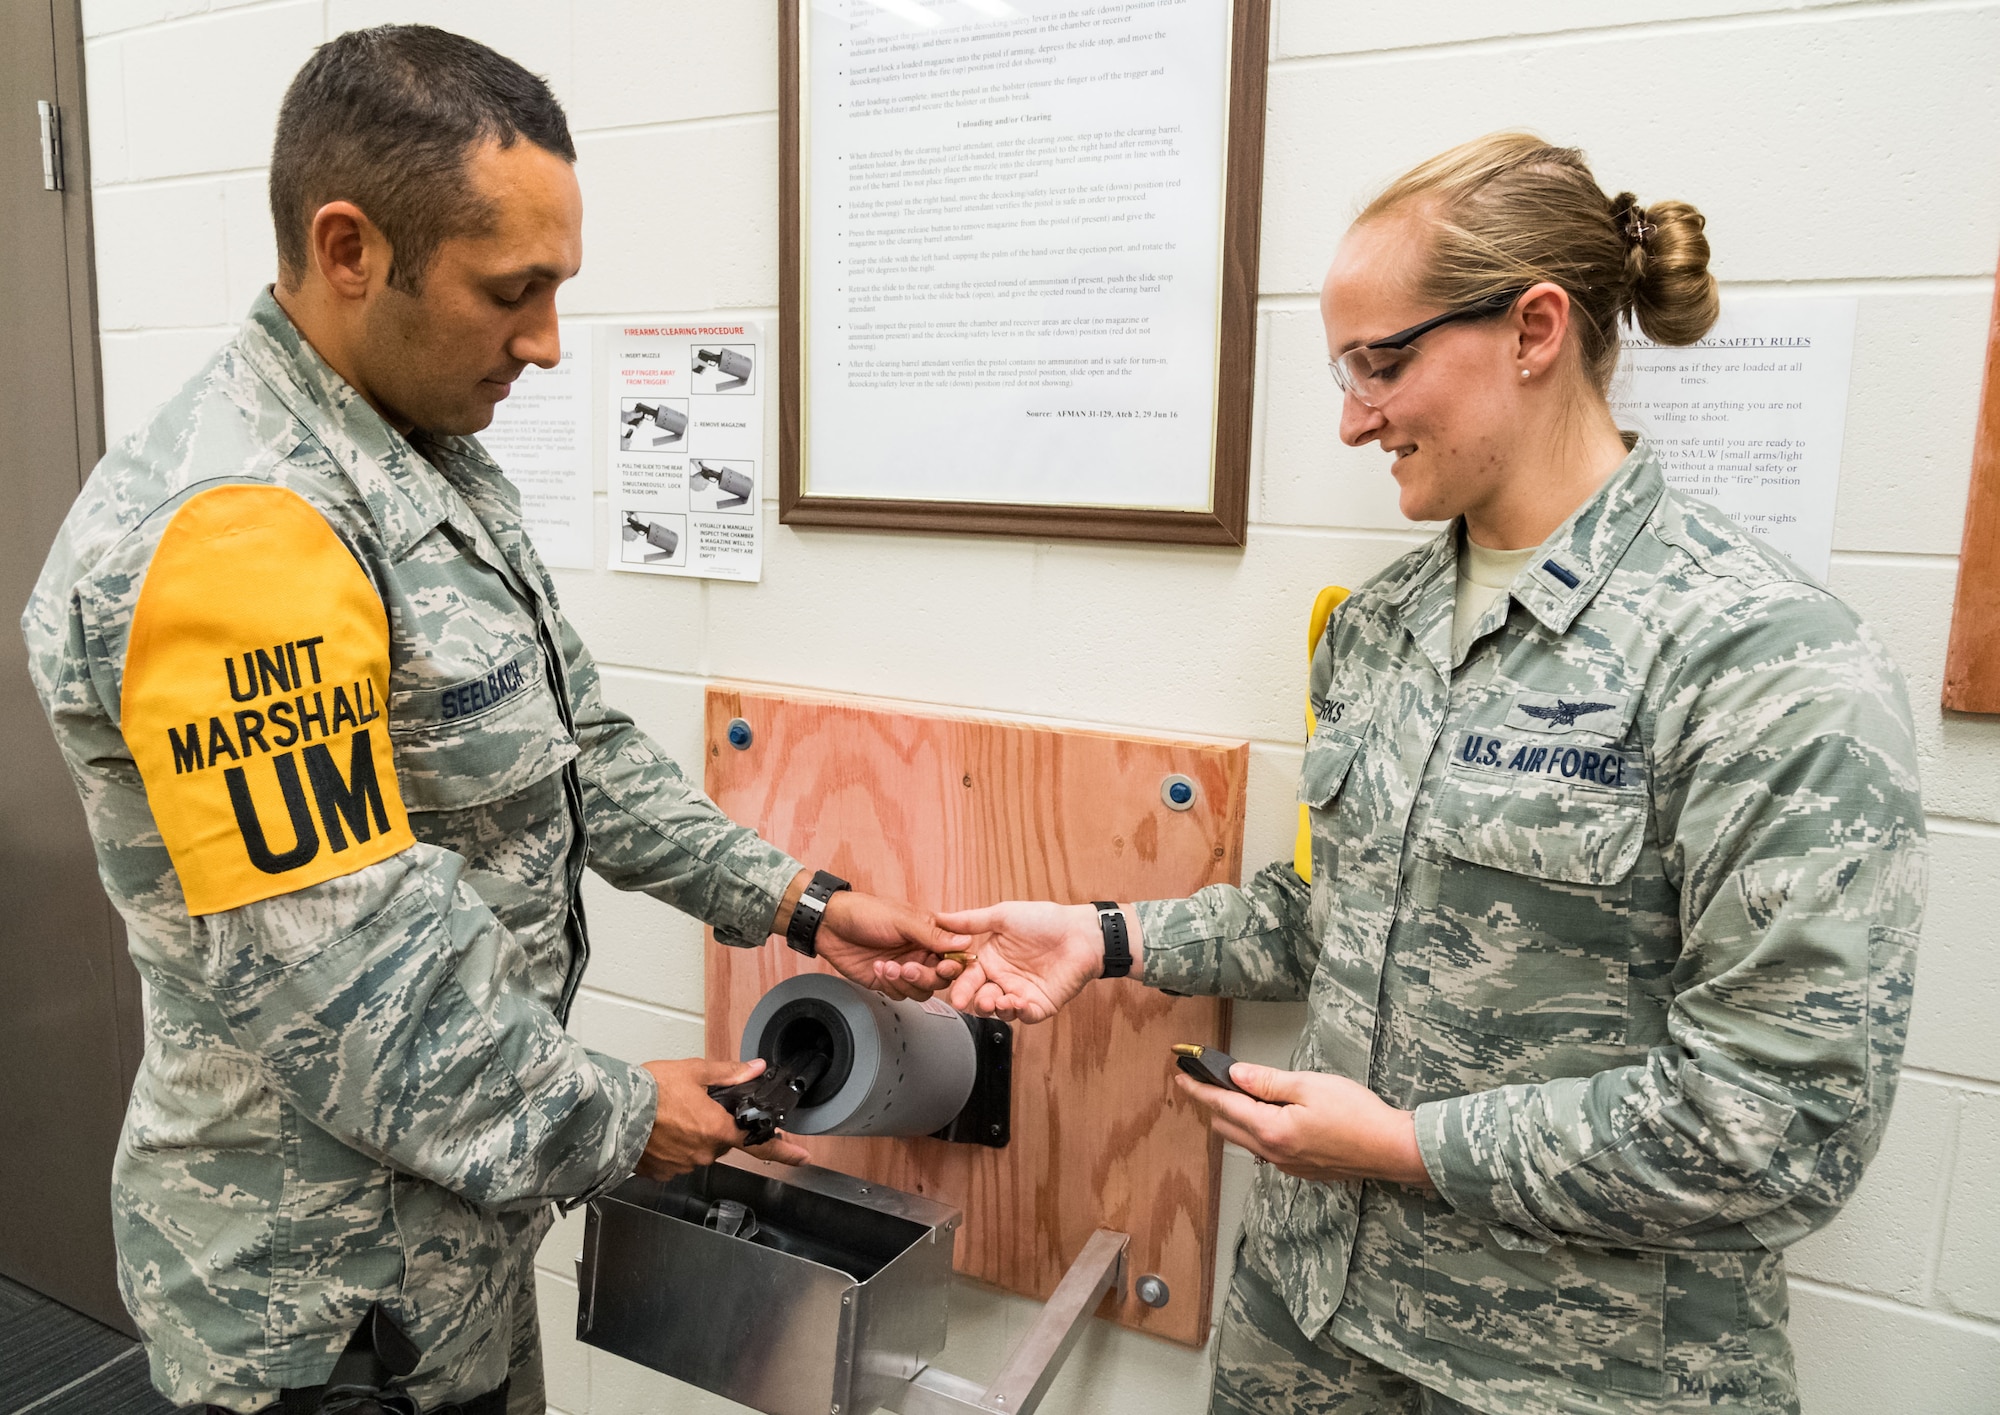 Tech. Sgt. Damien Seelbach, cybersecurity noncommissioned officer in charge, hands 1st Lt. Rachael Burks, cyber operations flight commander, a 9mm bullet from the chamber of a Beretta M9 during the disarming process conducted in the 436th Communications Squadron’s arming area, Oct. 24, 2019, on Dover Air Force Base, Del. Both Seelbach and Burks are squadron Unit Marshals. (U.S. Air Force photo by Roland Balik)